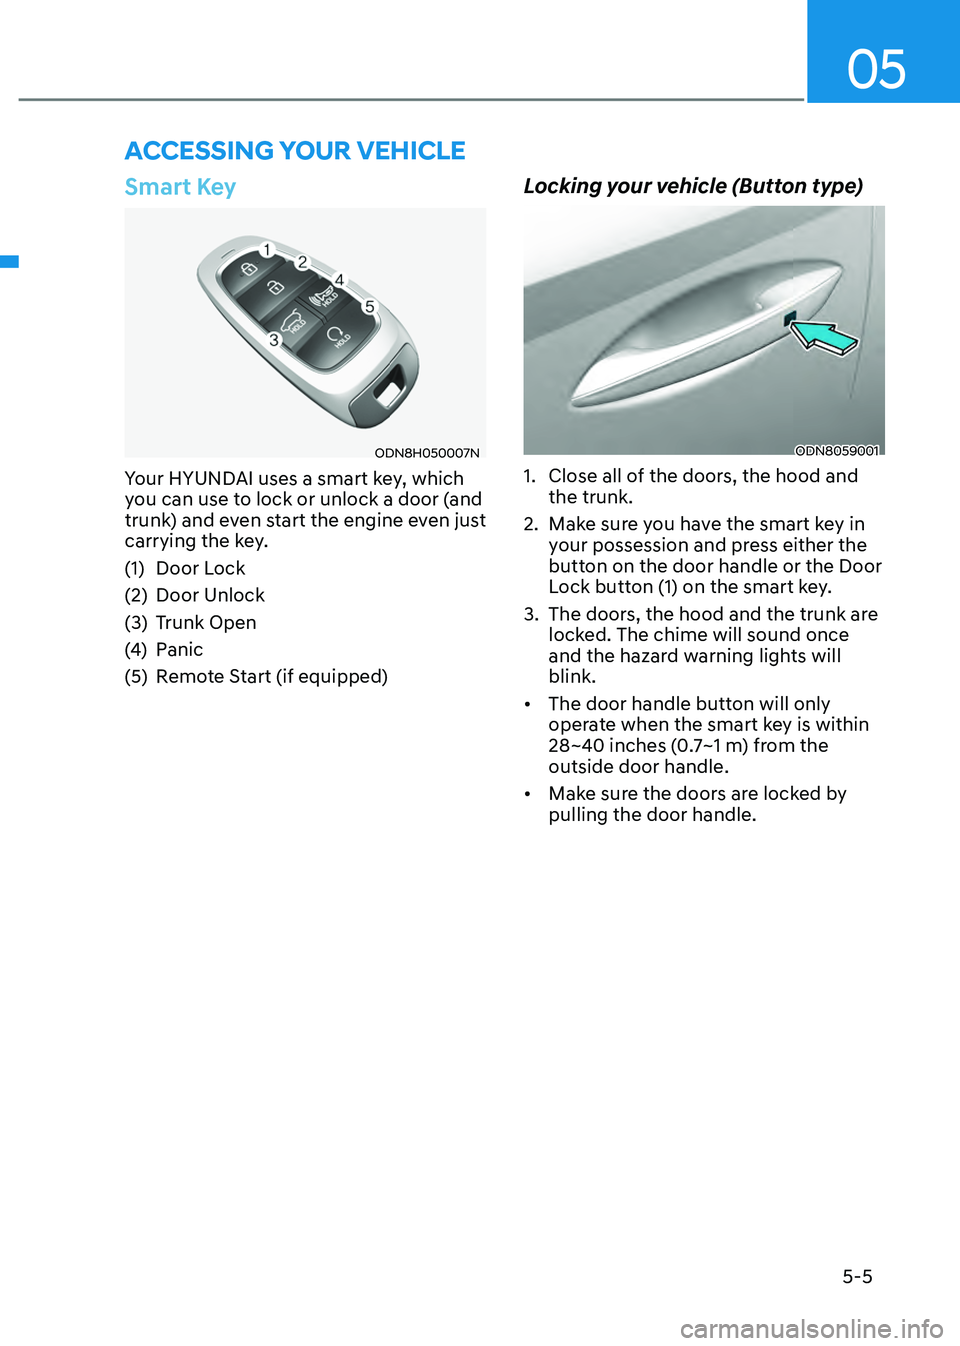 HYUNDAI SONATA HYBRID 2022  Owners Manual 05
5-5
Smart Key
ODN8H050007N
Your HYUNDAI uses a smart key, which 
you can use to lock or unlock a door (and 
trunk) and even start the engine even just 
carrying the key.
(1) Door Lock
(2) Door Unlo